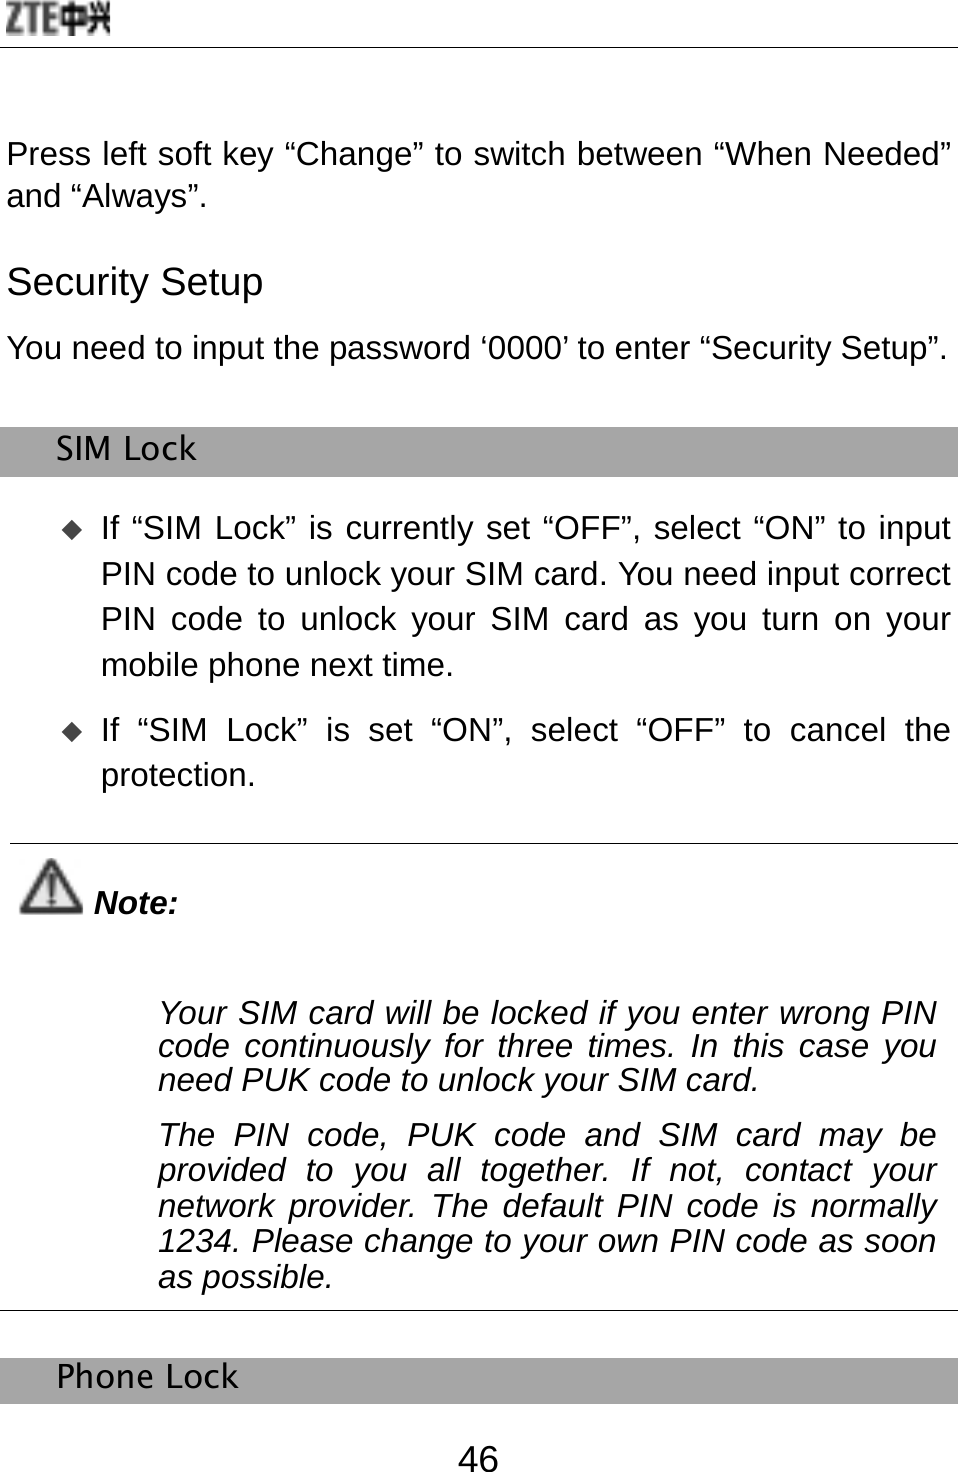  46 Press left soft key “Change” to switch between “When Needed” and “Always”. Security Setup You need to input the password ‘0000’ to enter “Security Setup”. SIM Lock  If “SIM Lock” is currently set “OFF”, select “ON” to input PIN code to unlock your SIM card. You need input correct PIN code to unlock your SIM card as you turn on your mobile phone next time.  If “SIM Lock” is set “ON”, select “OFF” to cancel the protection.  Note: Your SIM card will be locked if you enter wrong PIN code continuously for three times. In this case you need PUK code to unlock your SIM card.   The PIN code, PUK code and SIM card may be provided to you all together. If not, contact your network provider. The default PIN code is normally 1234. Please change to your own PIN code as soon as possible.    Phone Lock 